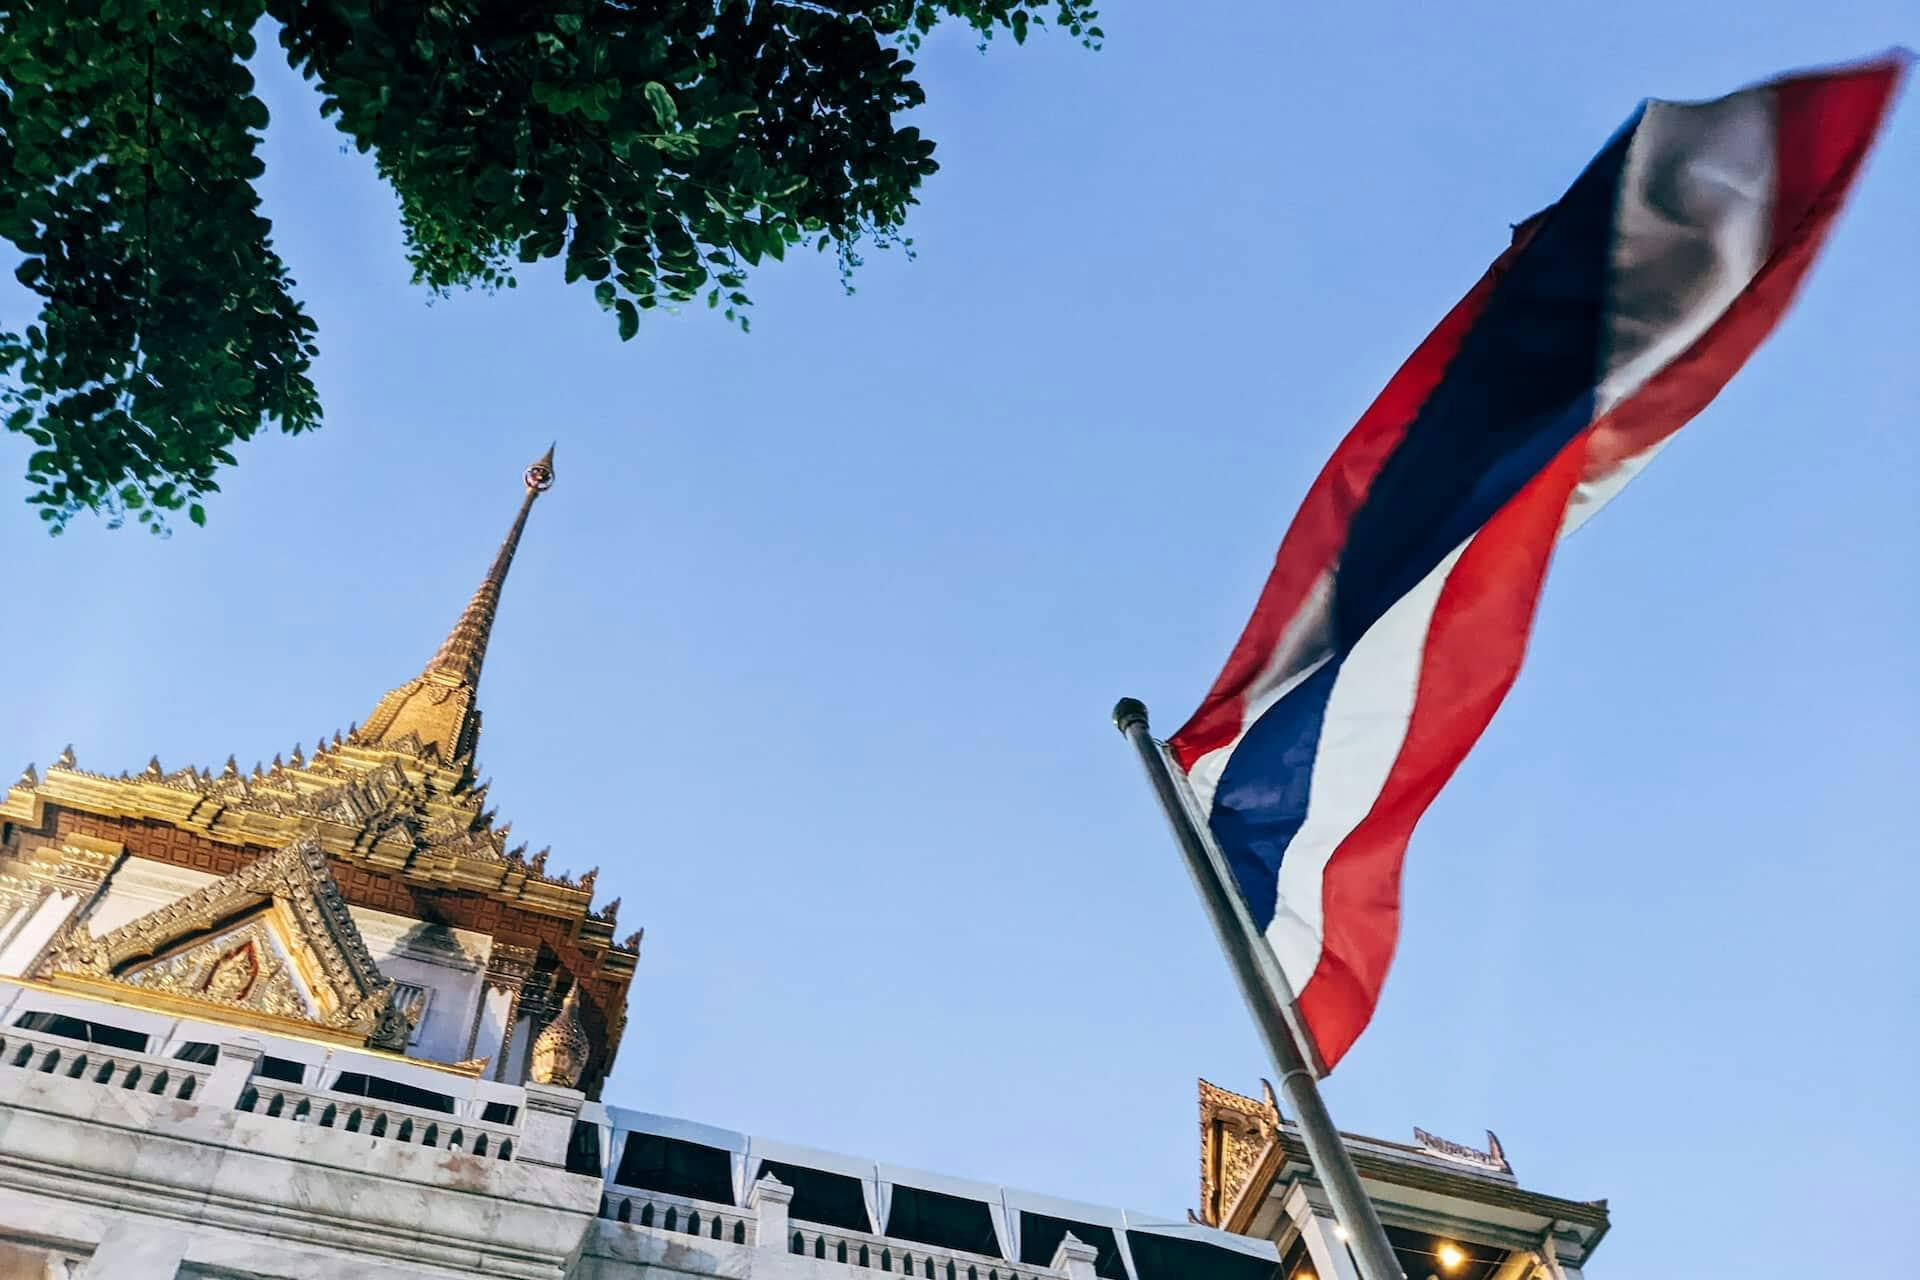 Thailand Pushes Towards Digital Asset Hub with Introduction of VAT-Free Crypto Trading